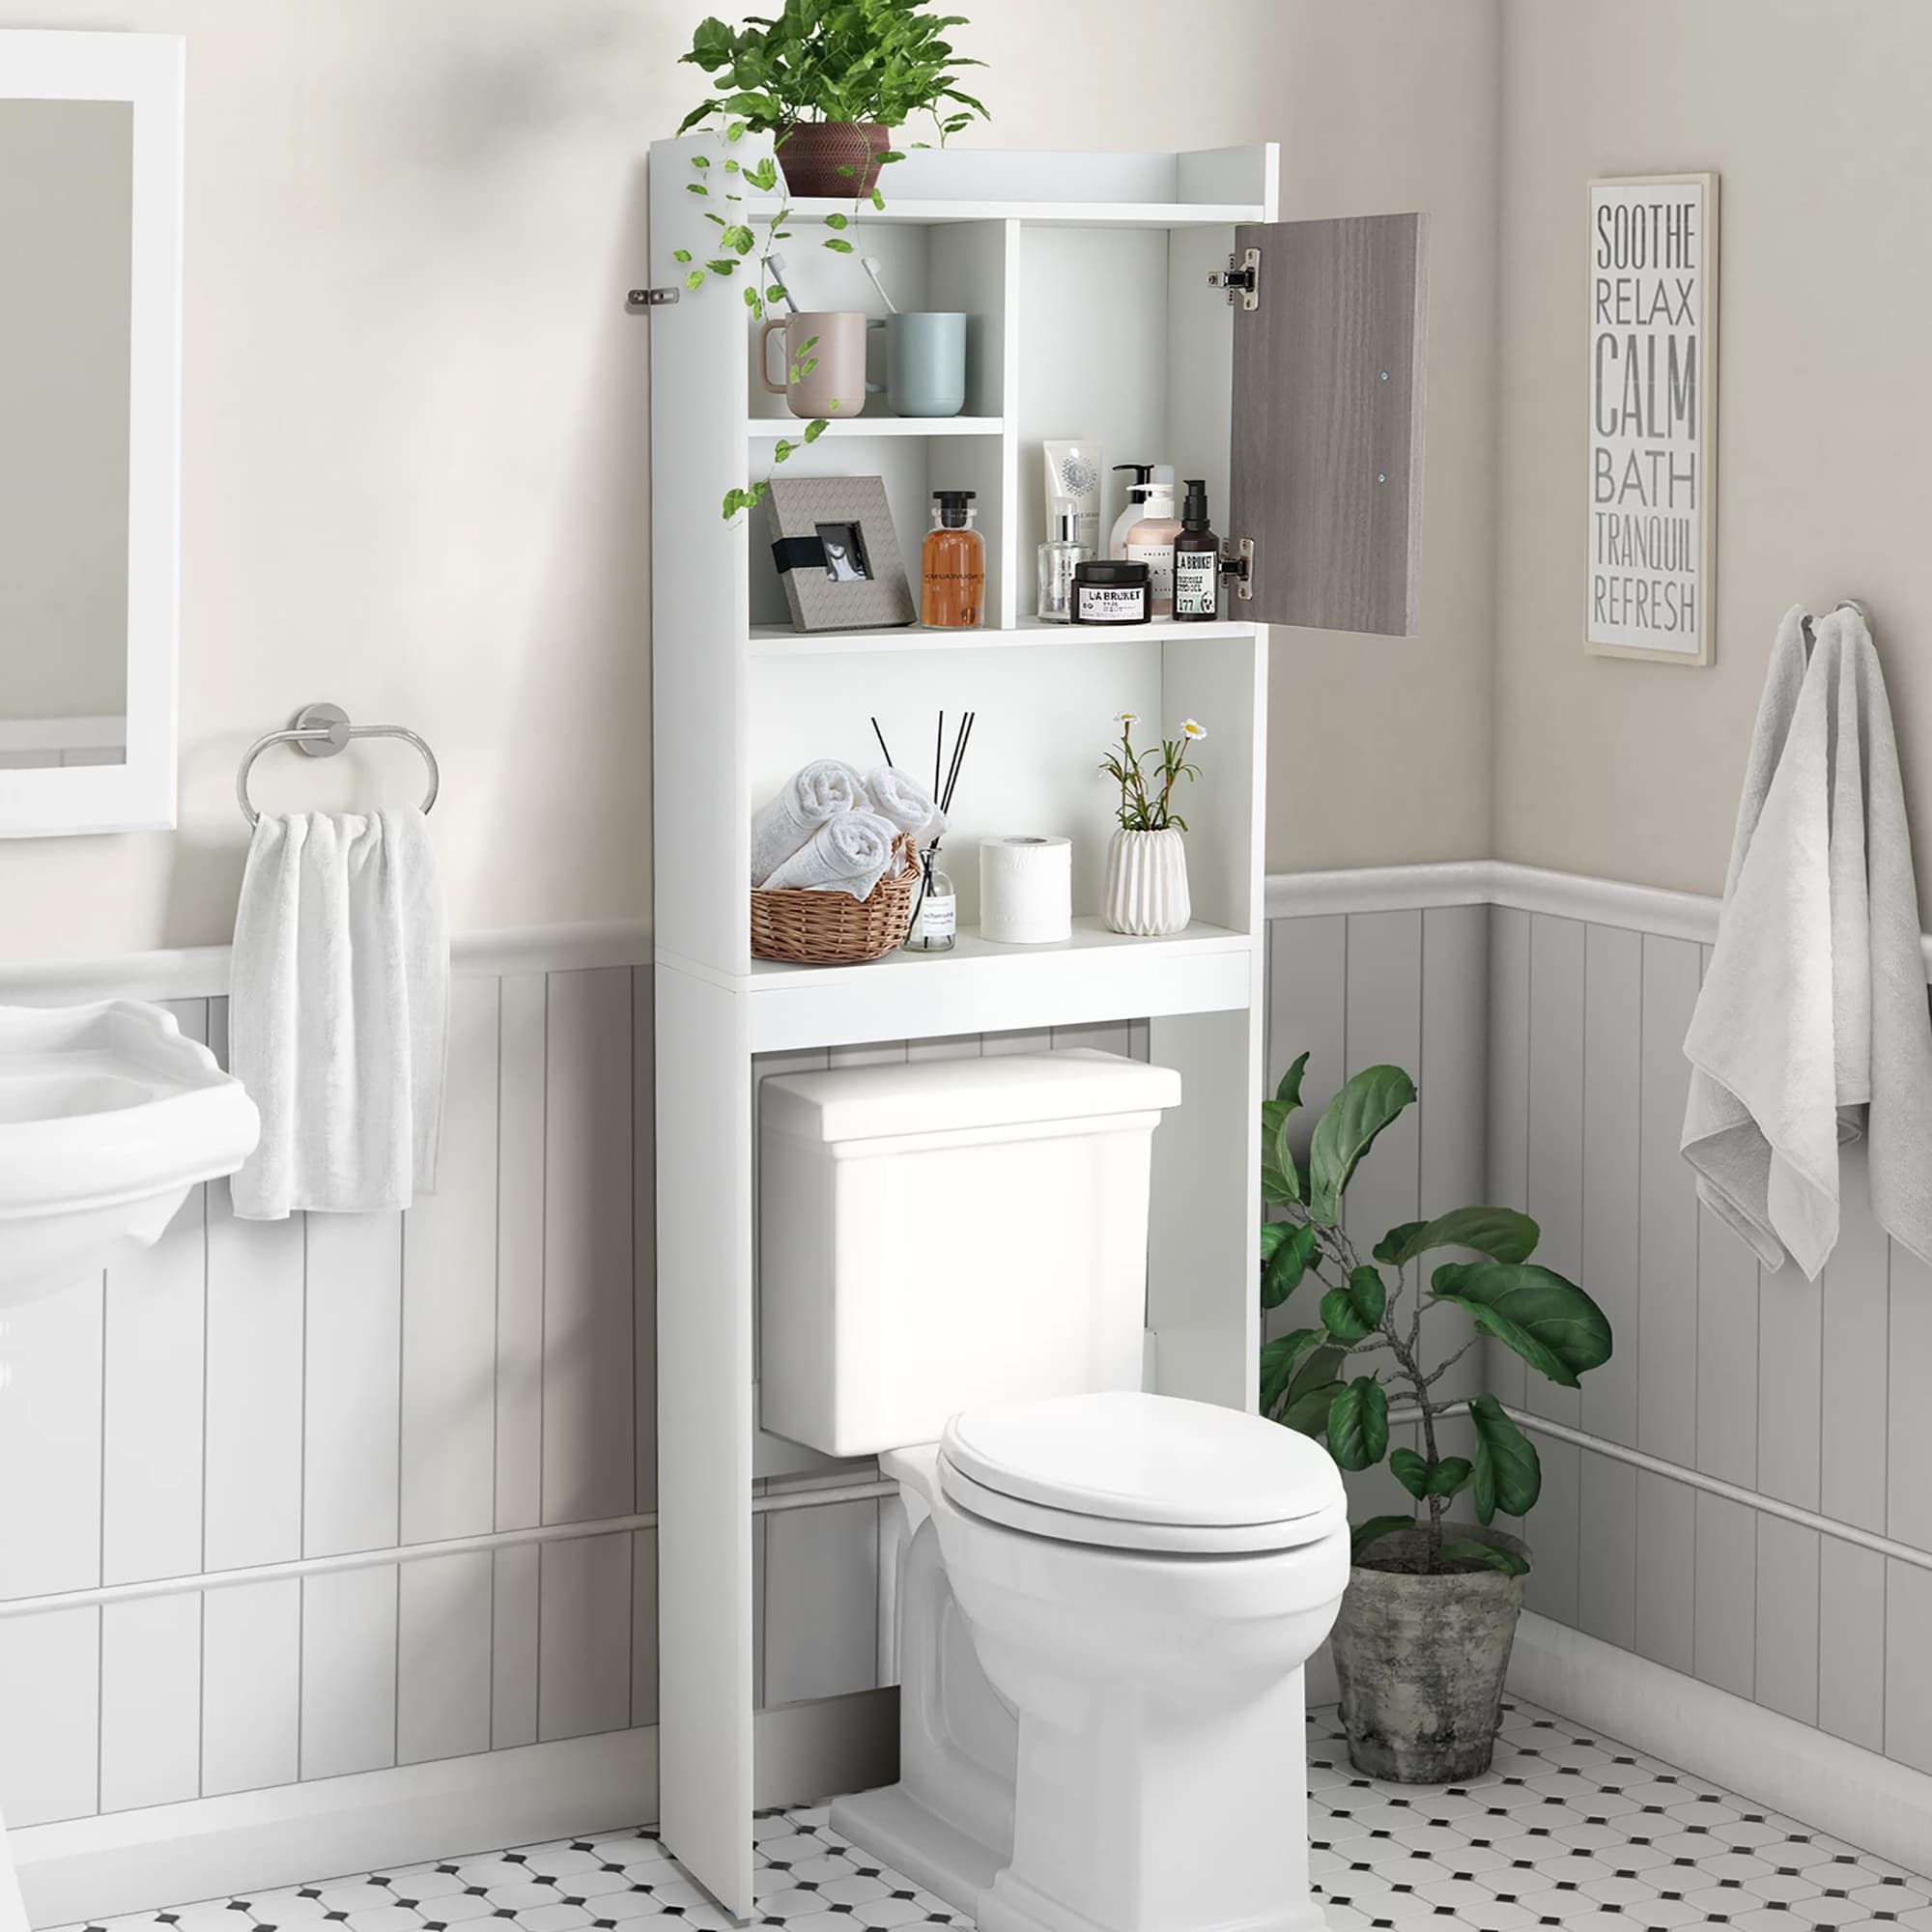 https://ak1.ostkcdn.com/images/products/is/images/direct/7ace876c6461557886c3151a62b3a21fe9e1e867/Costway-Over-The-Toilet-Storage-Cabinet-Bathroom-Space-Saver-w--Open.jpg